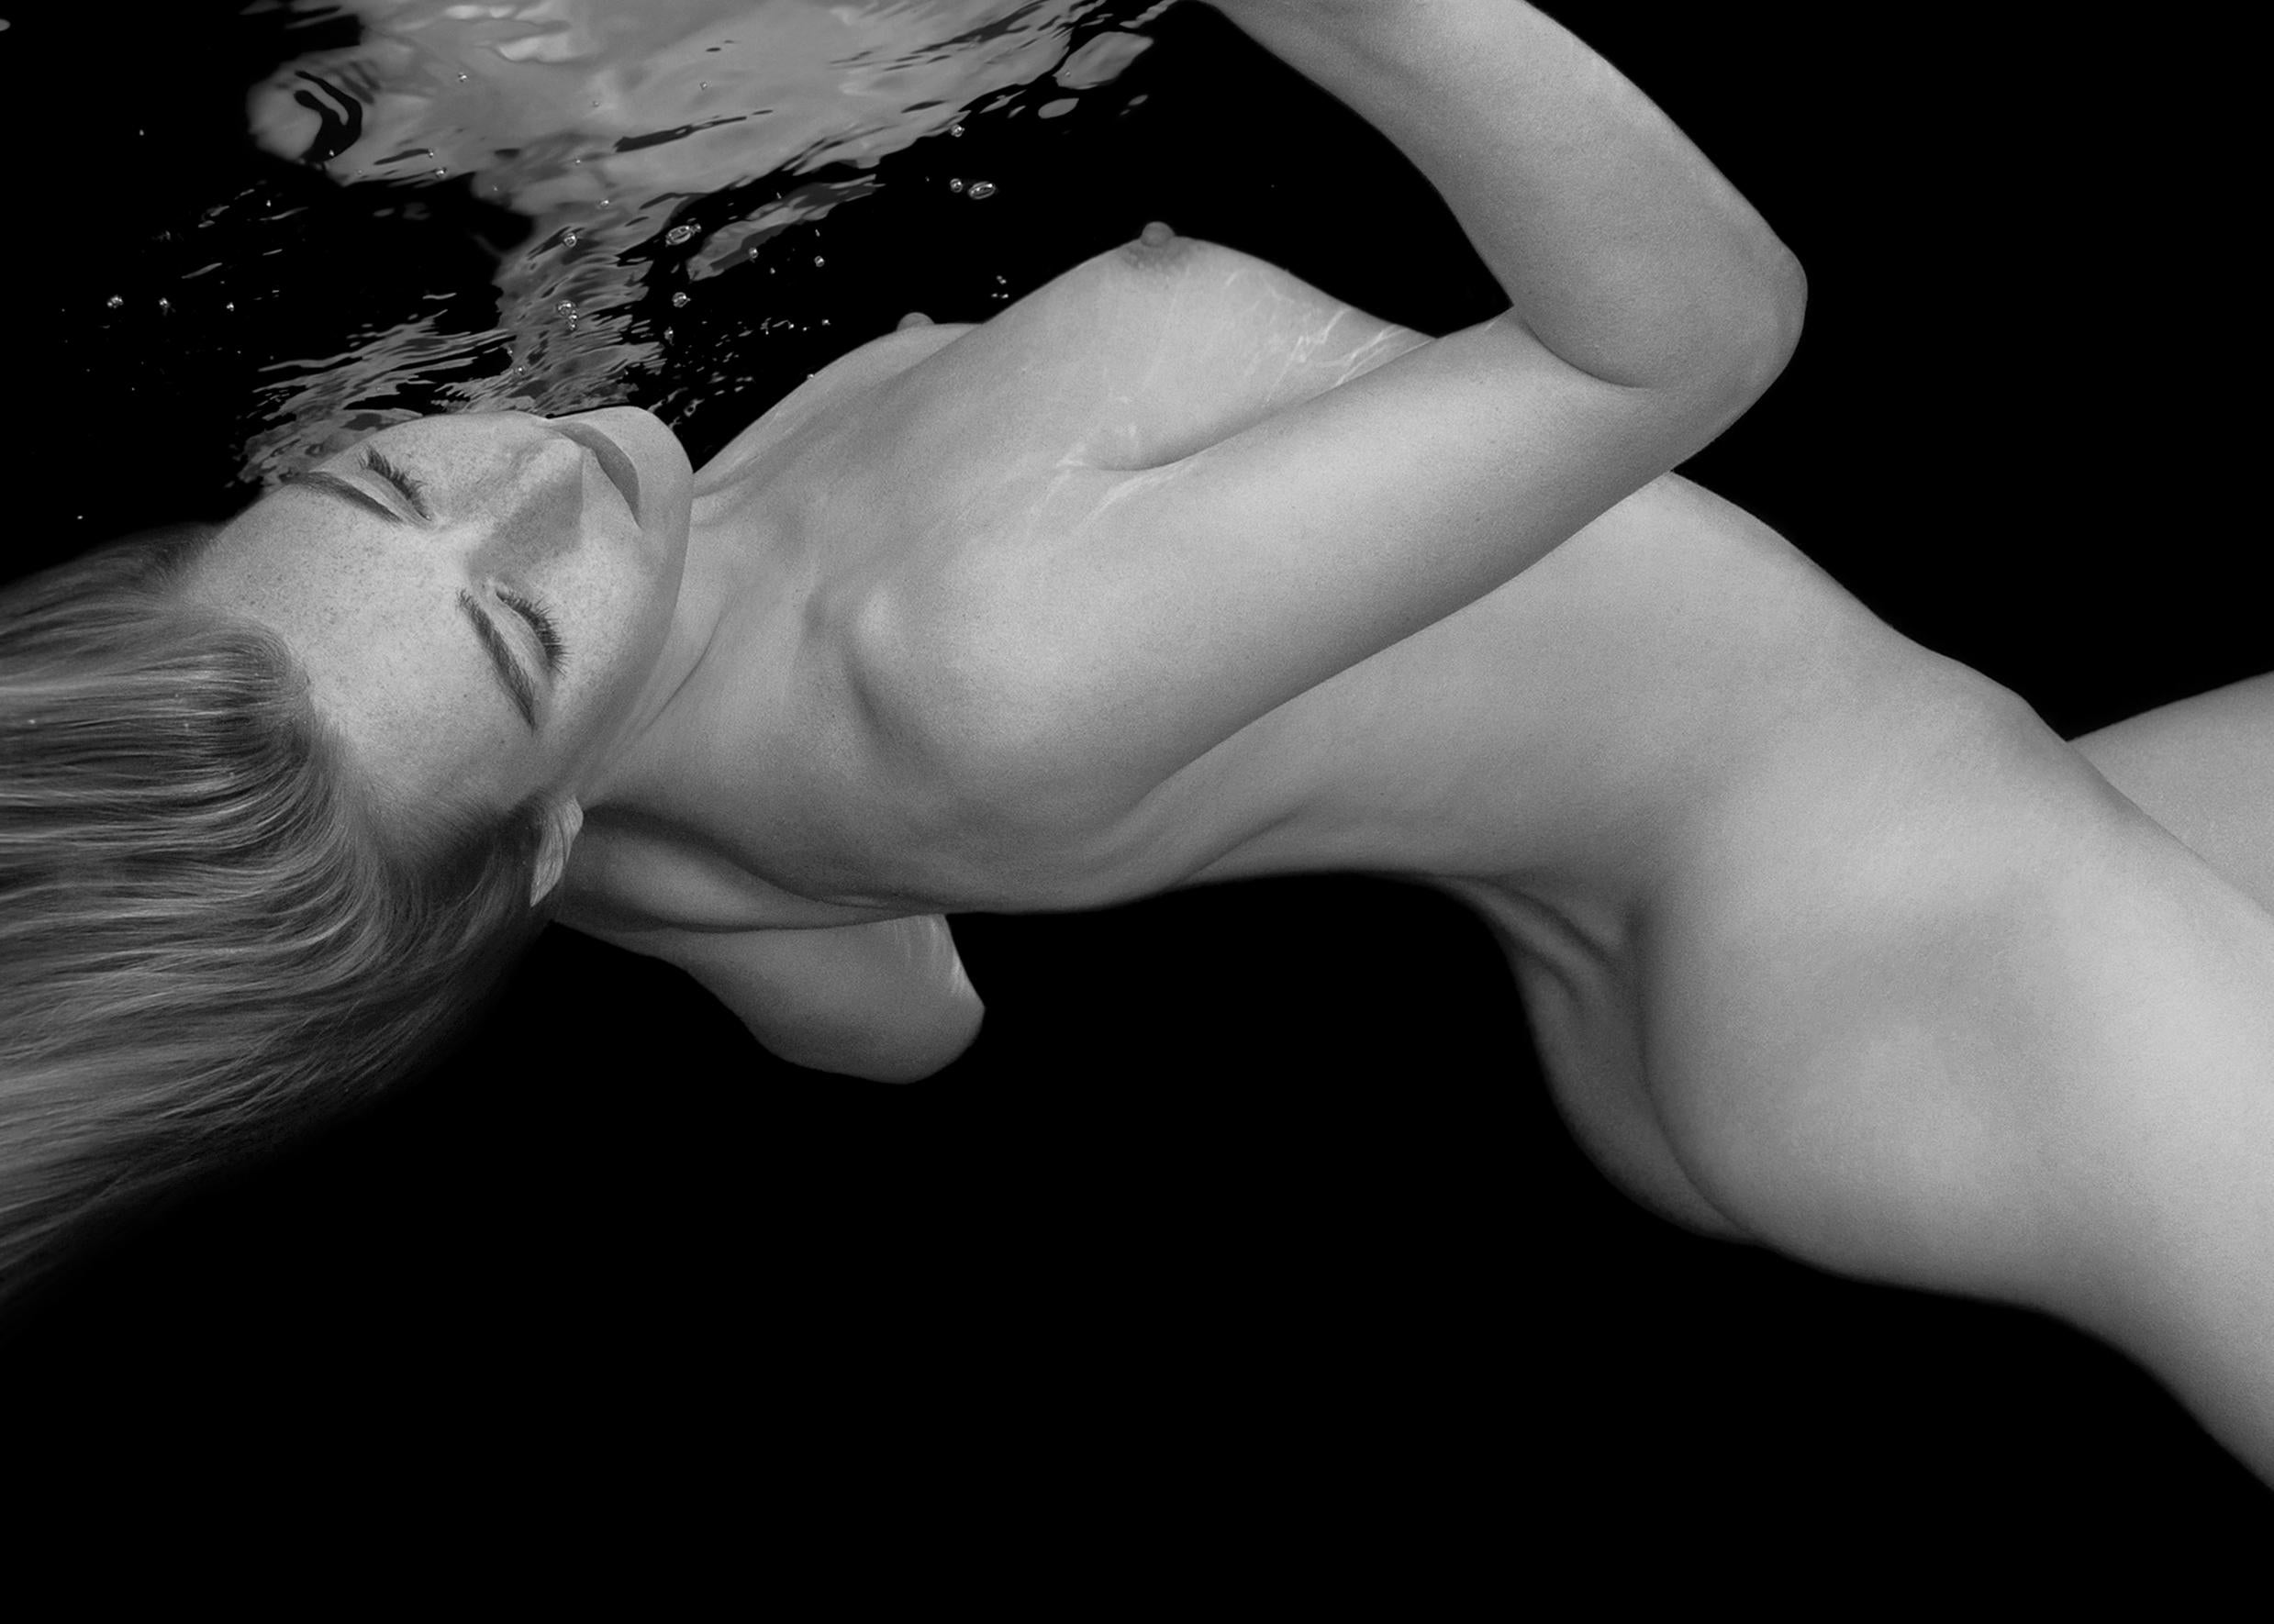 The Touch - underwater nude black & white photograph - print on aluminum 24